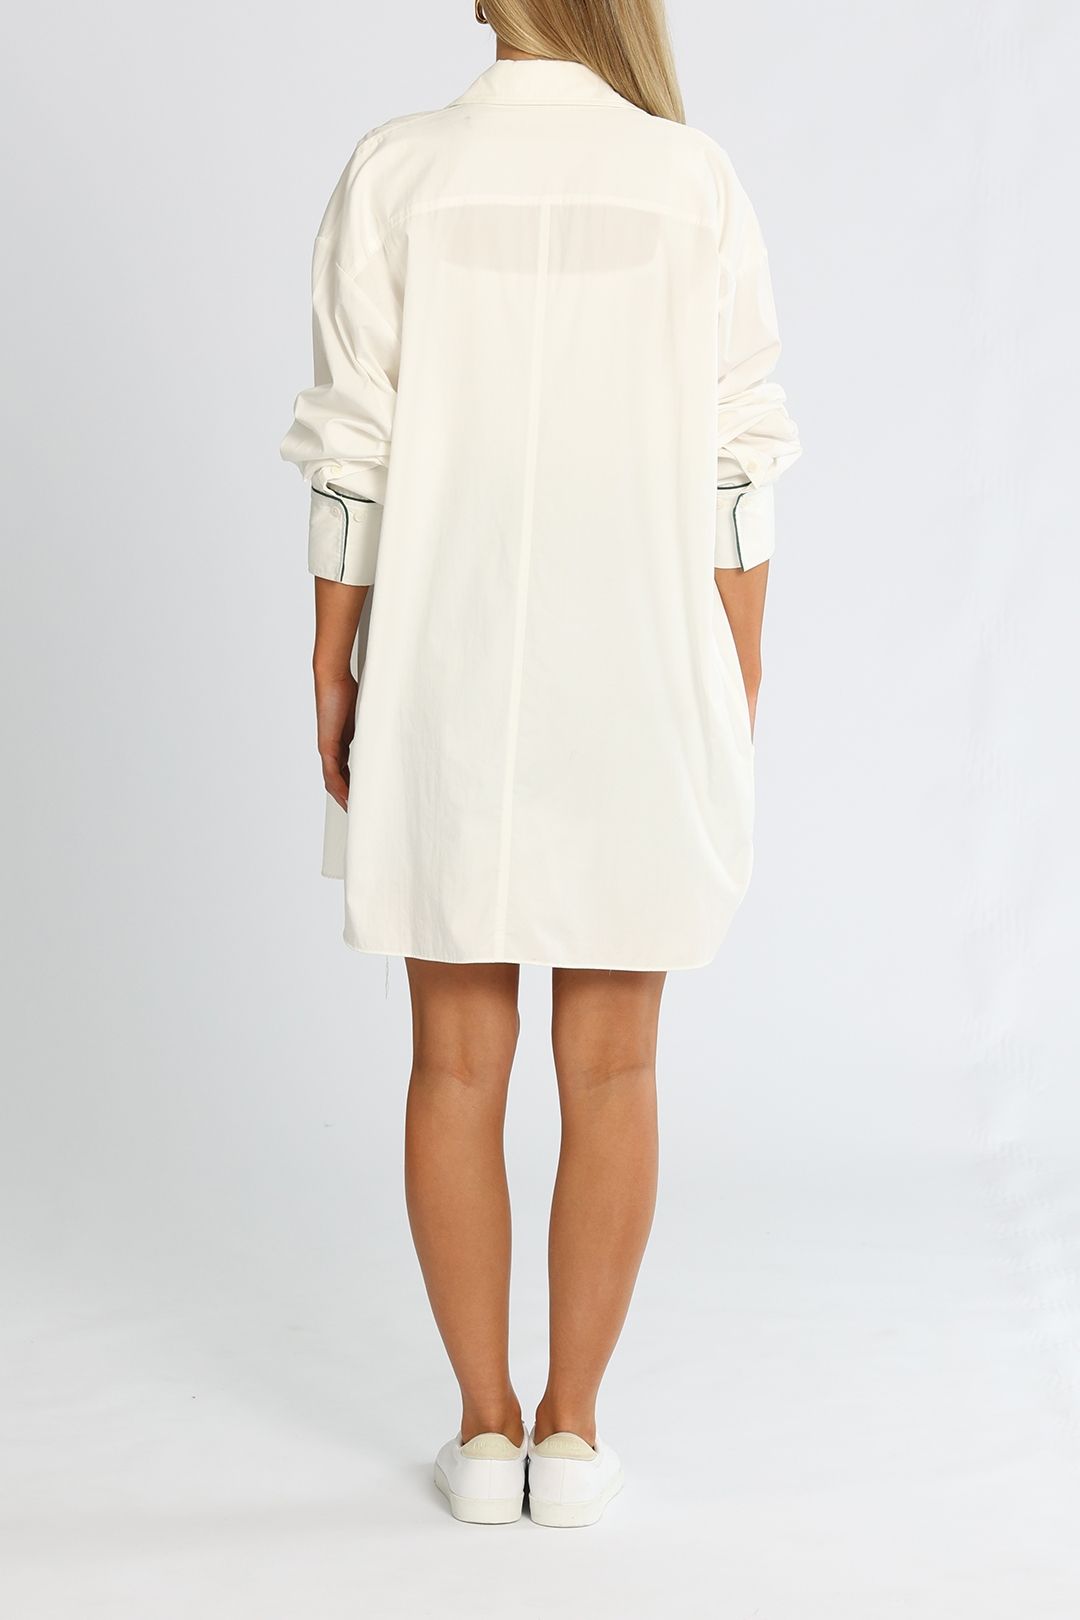 Camilla and Marc Idell Shirt White Long Length